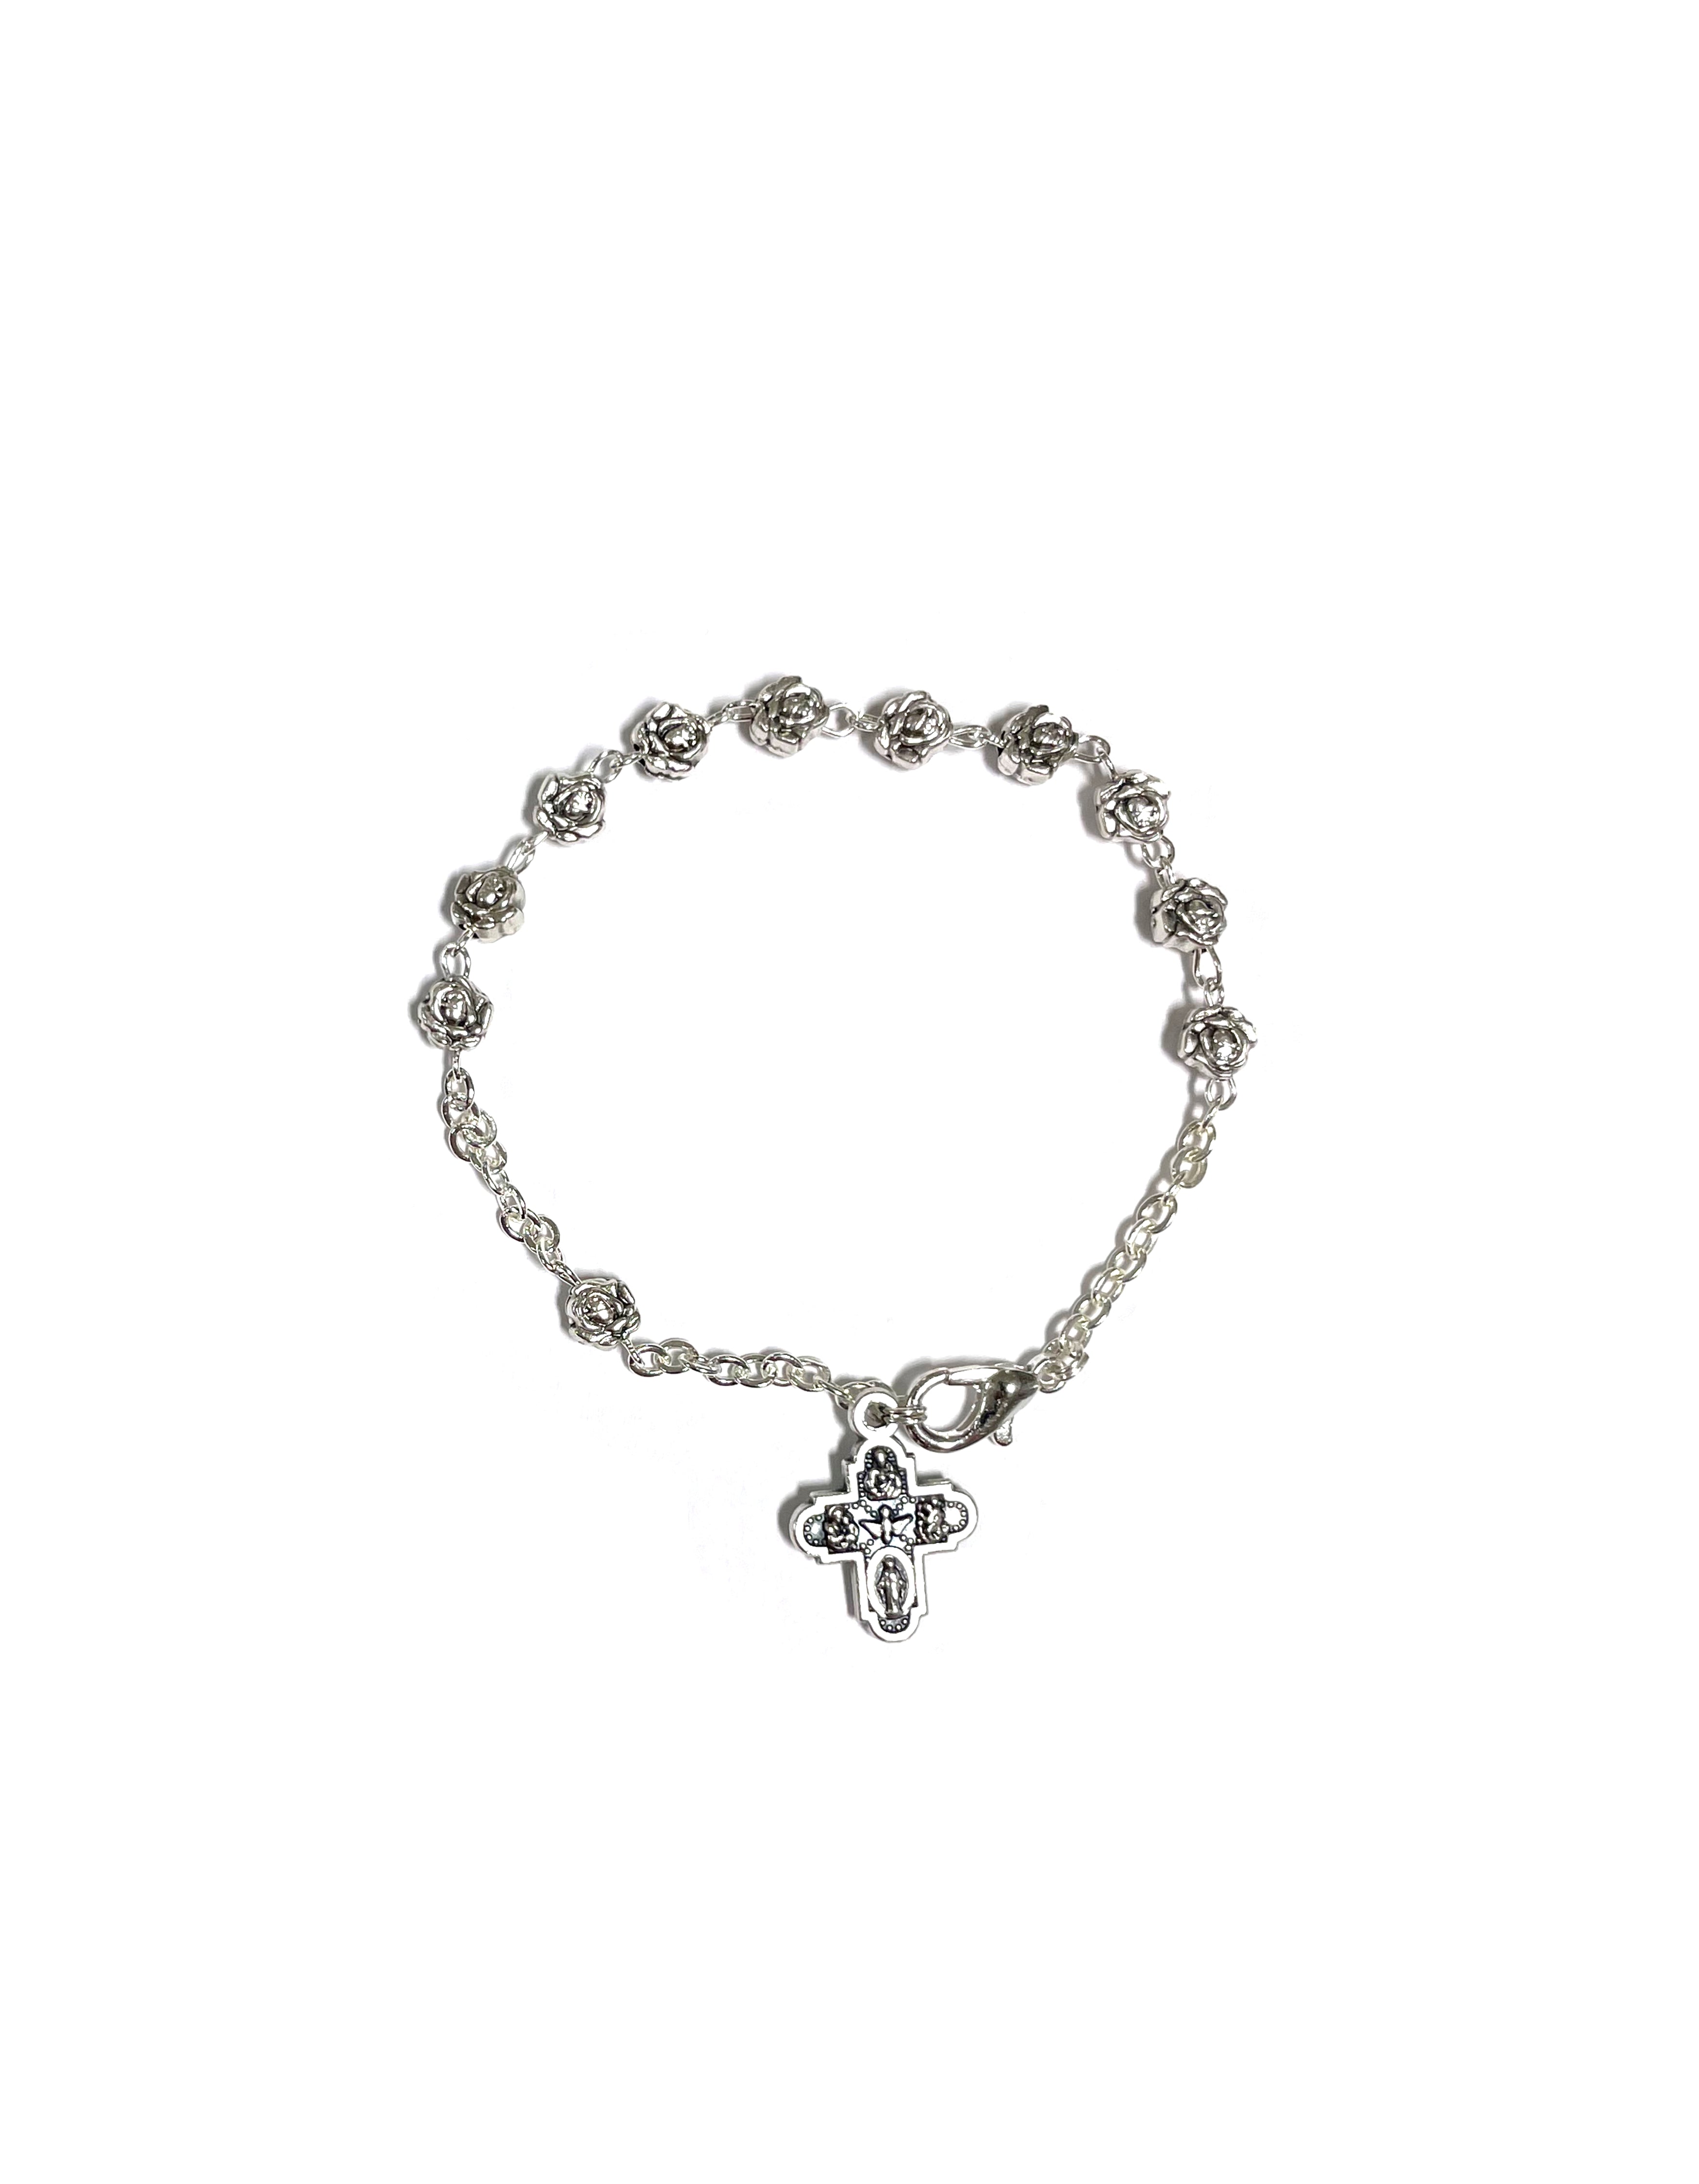 Oxidized silver decade bracelet with small five way cross and rose-shaped beads